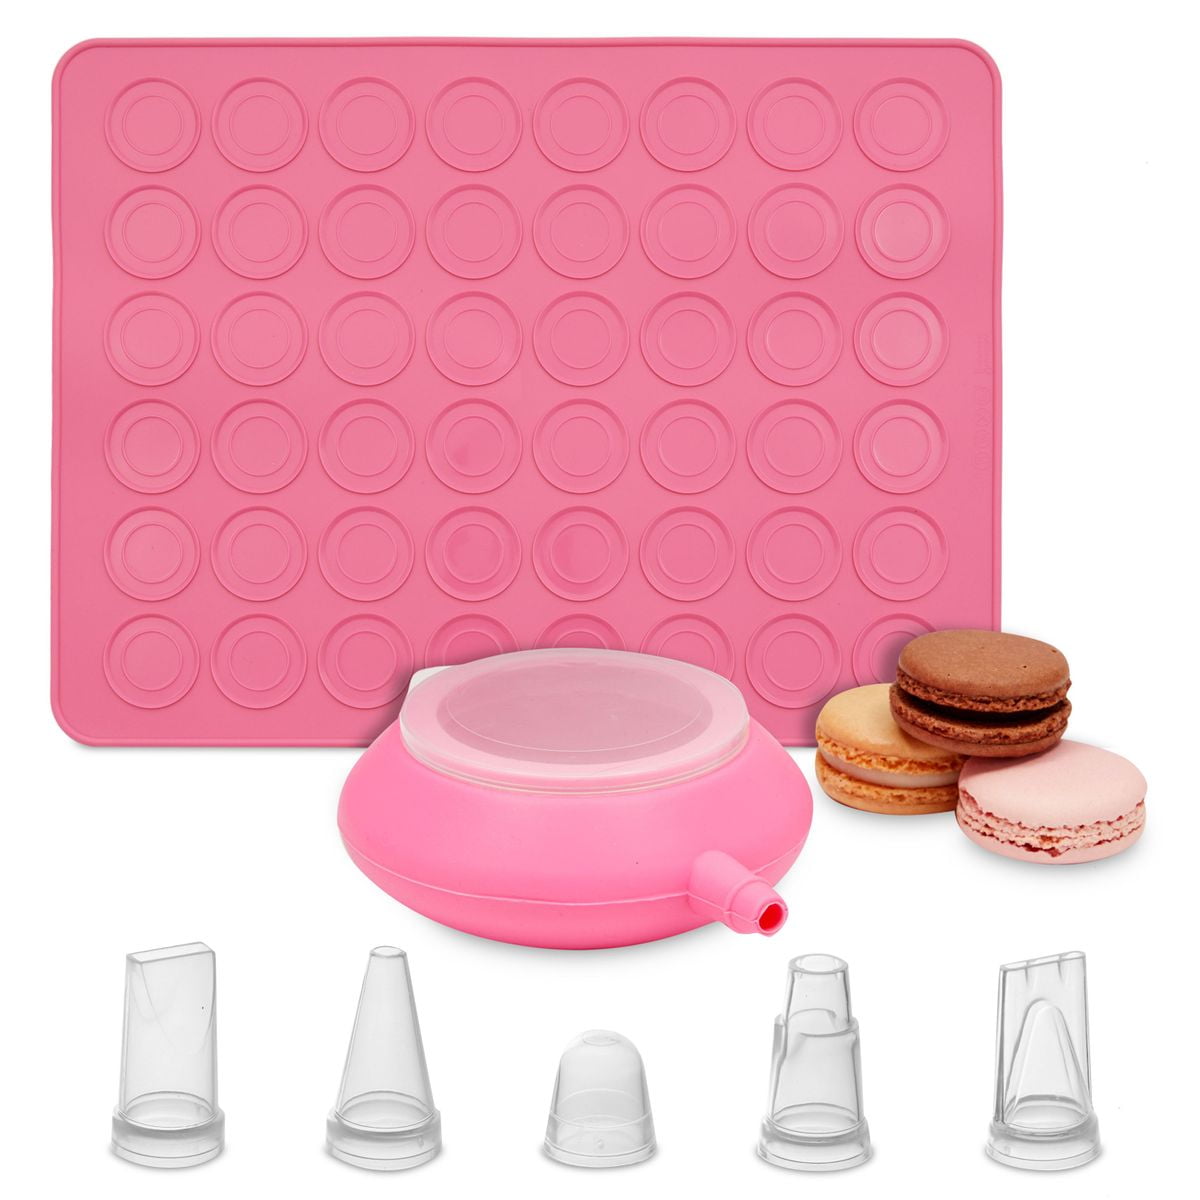 Nozzles Pink, 7 Pieces Piping Pot Macaron Baking Mold Set with Silicone Mat 